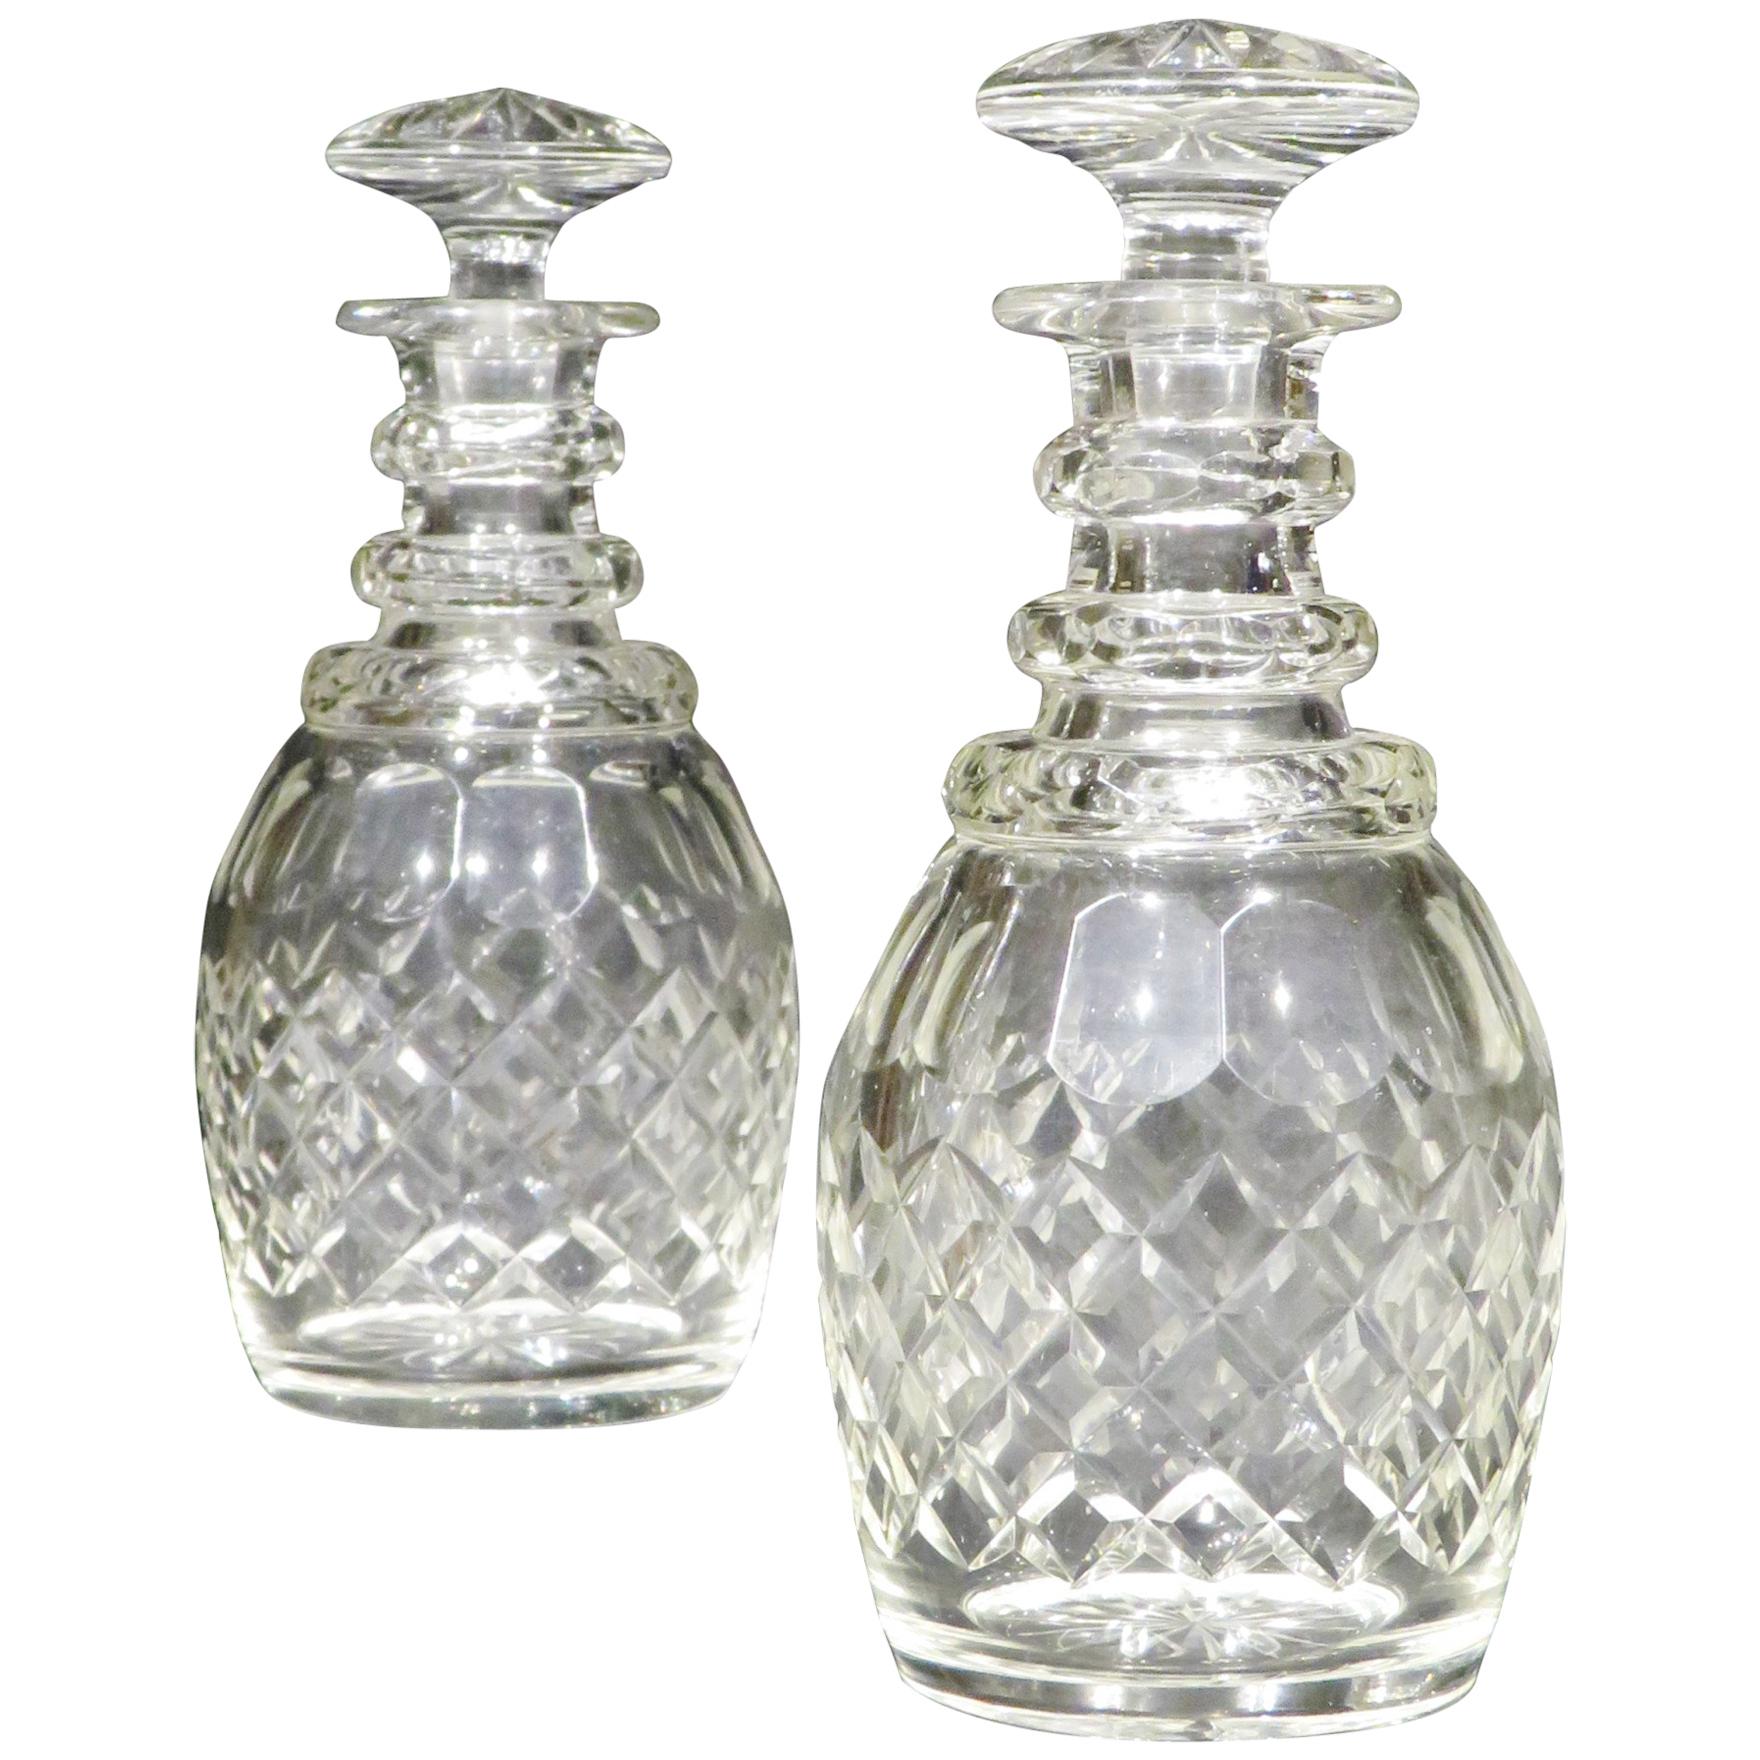 Both ovoid glass bodies exhibiting a slight greyish hue that is consistent with the period, decorated with scalloped & diamond cut detail, rising to faceted ringed necks fitted with their original dedicated and numbered mushroom stoppers, the